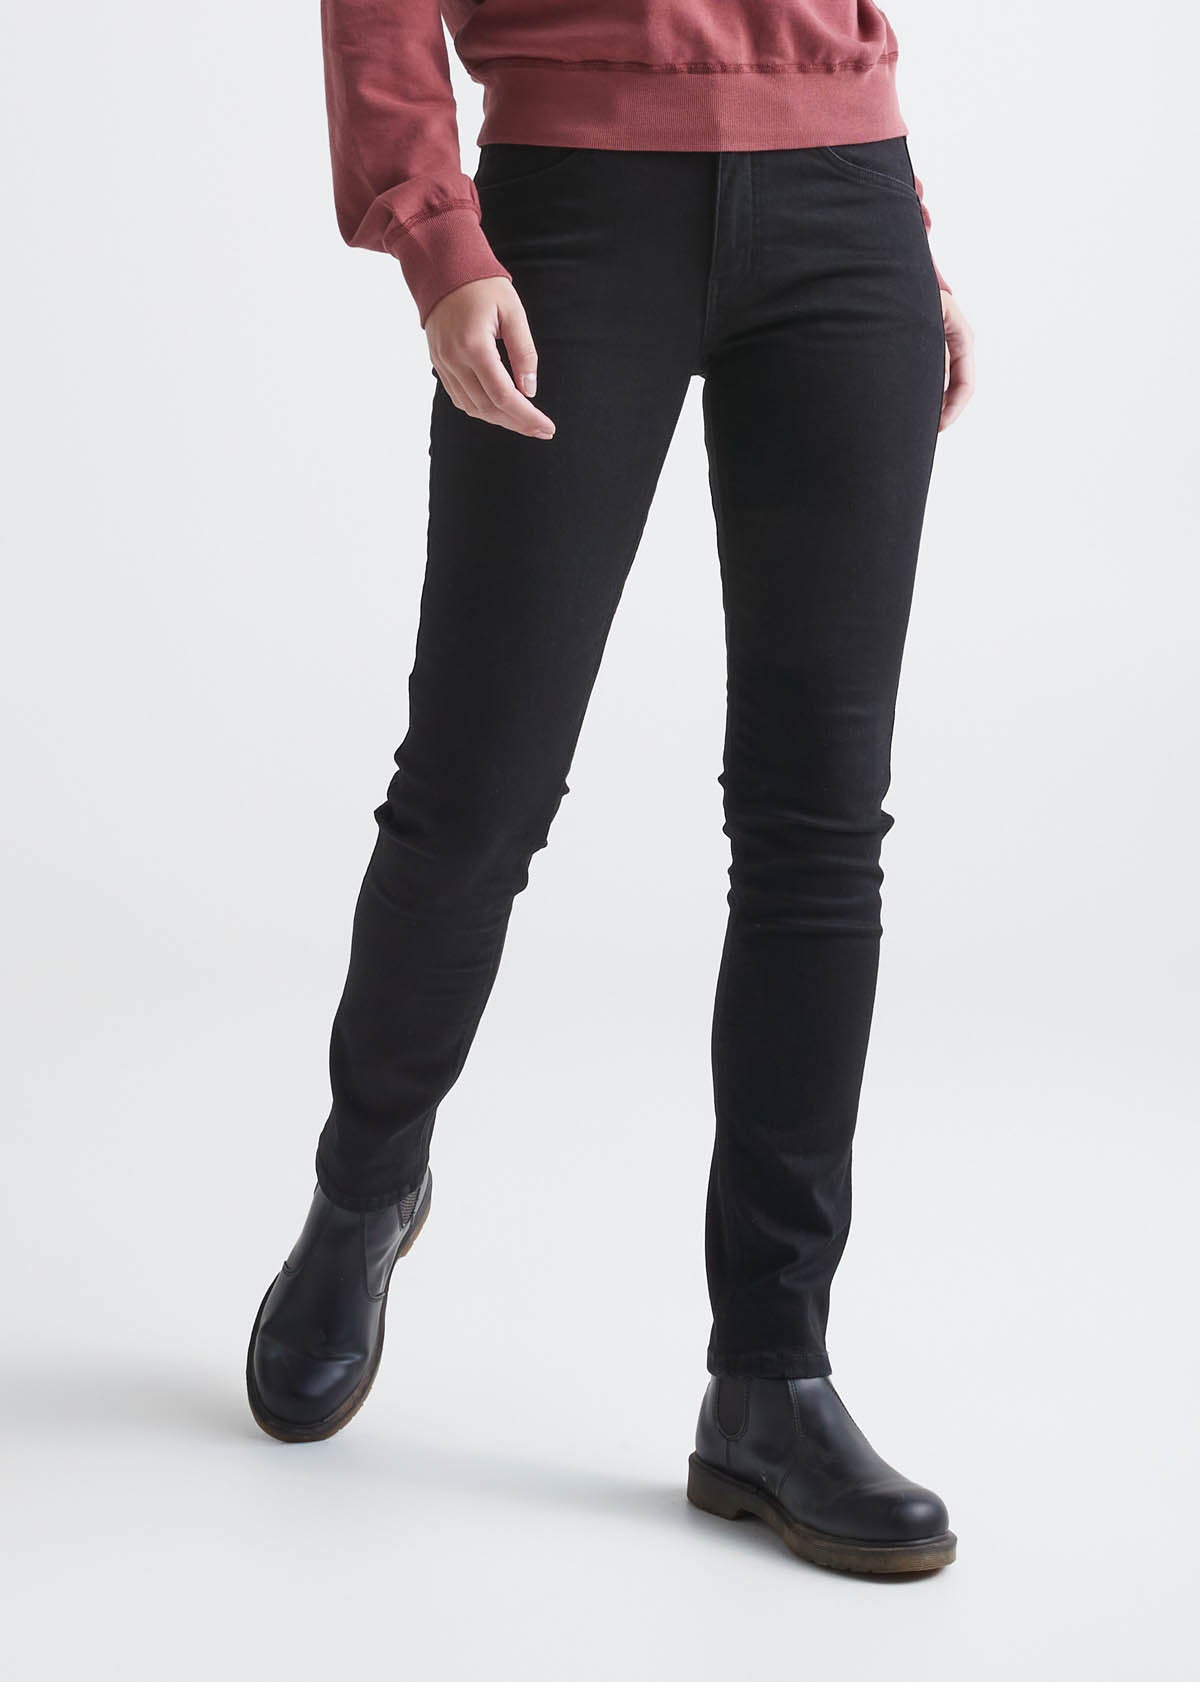 womens black slim fit stretch fleece-lined jeans front